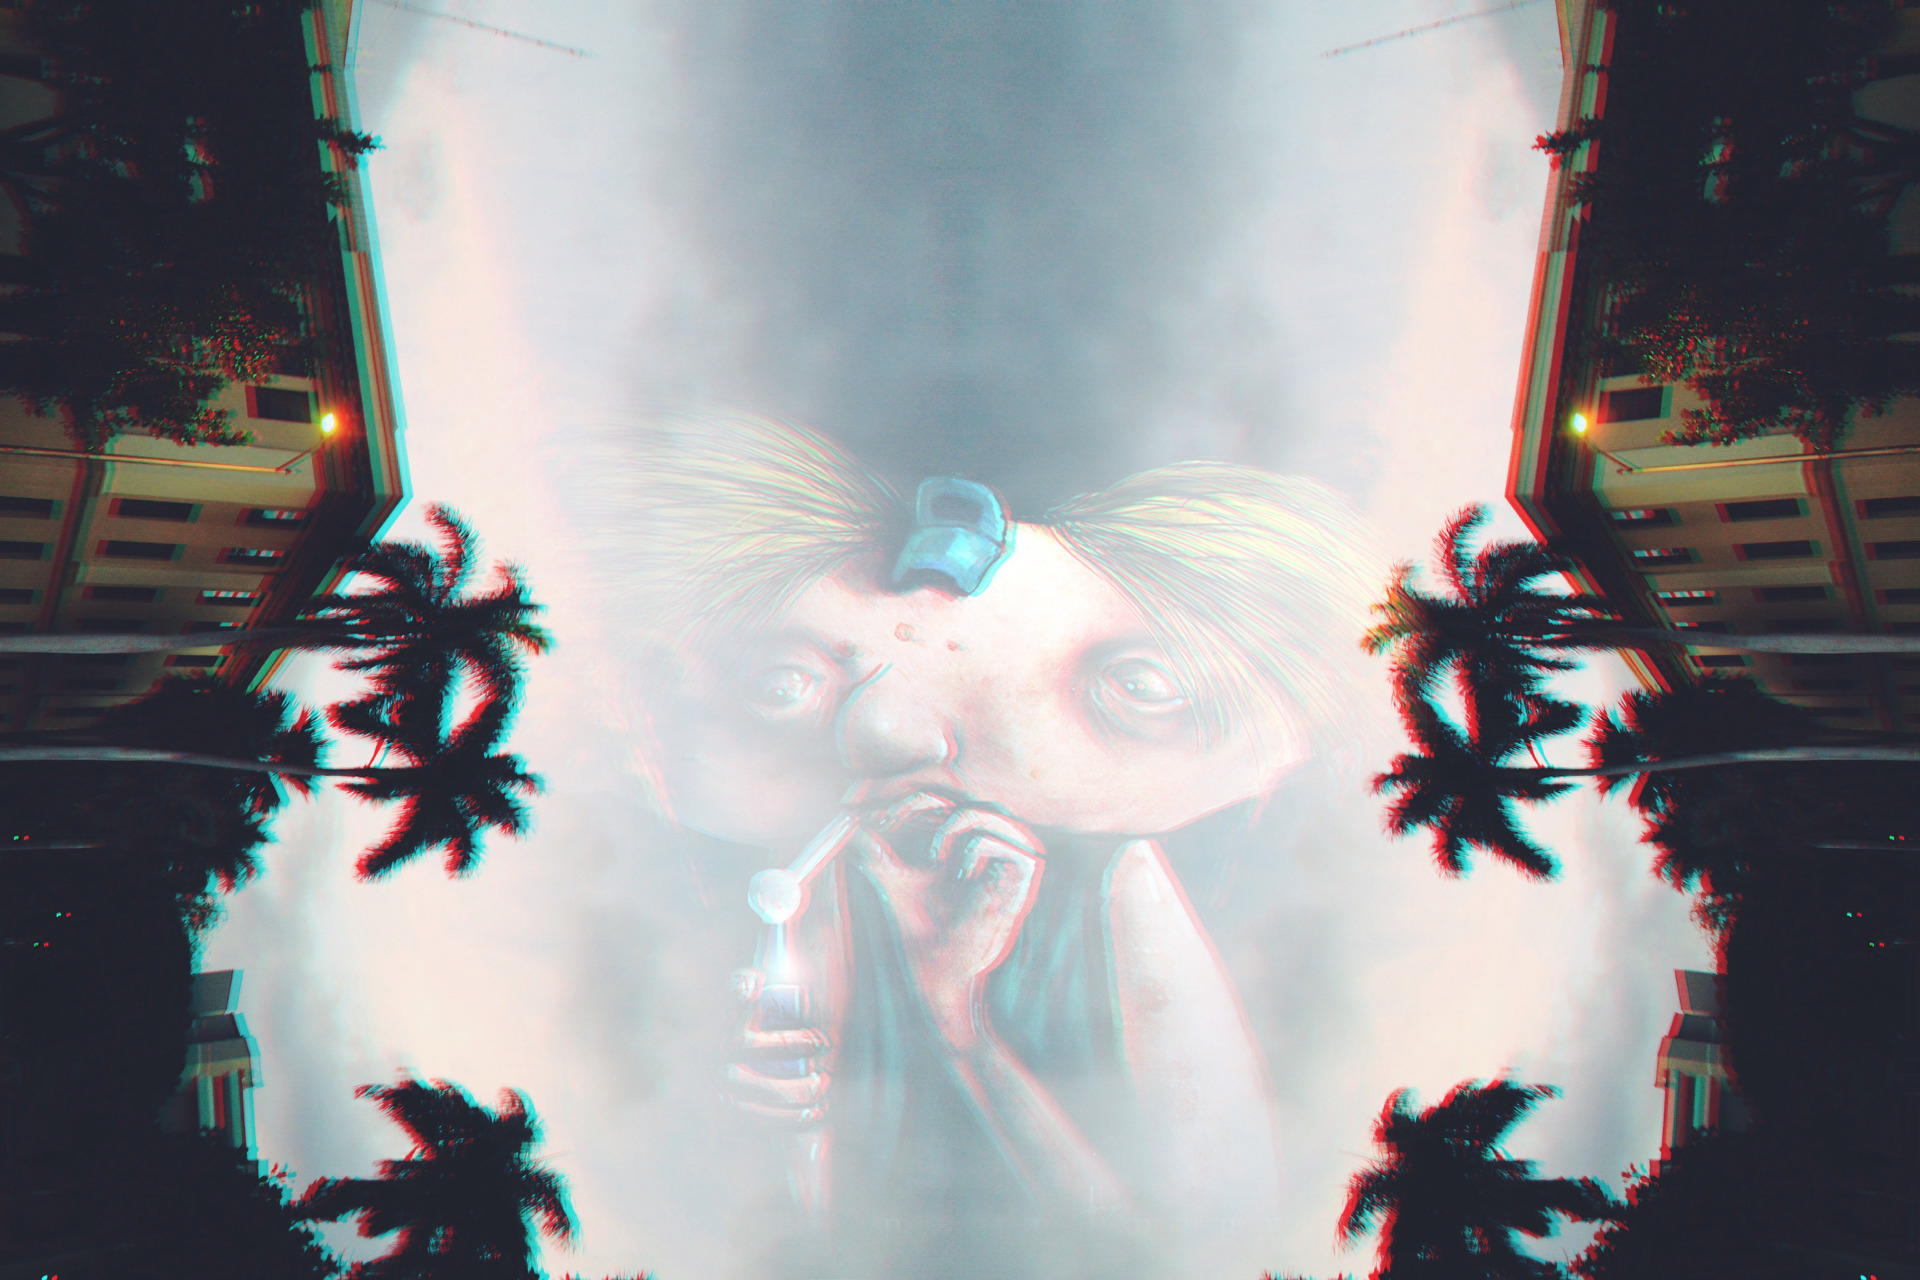 Hey Arnold!, Sky, Palm trees, Anaglyph 3D, Drugs Wallpaper